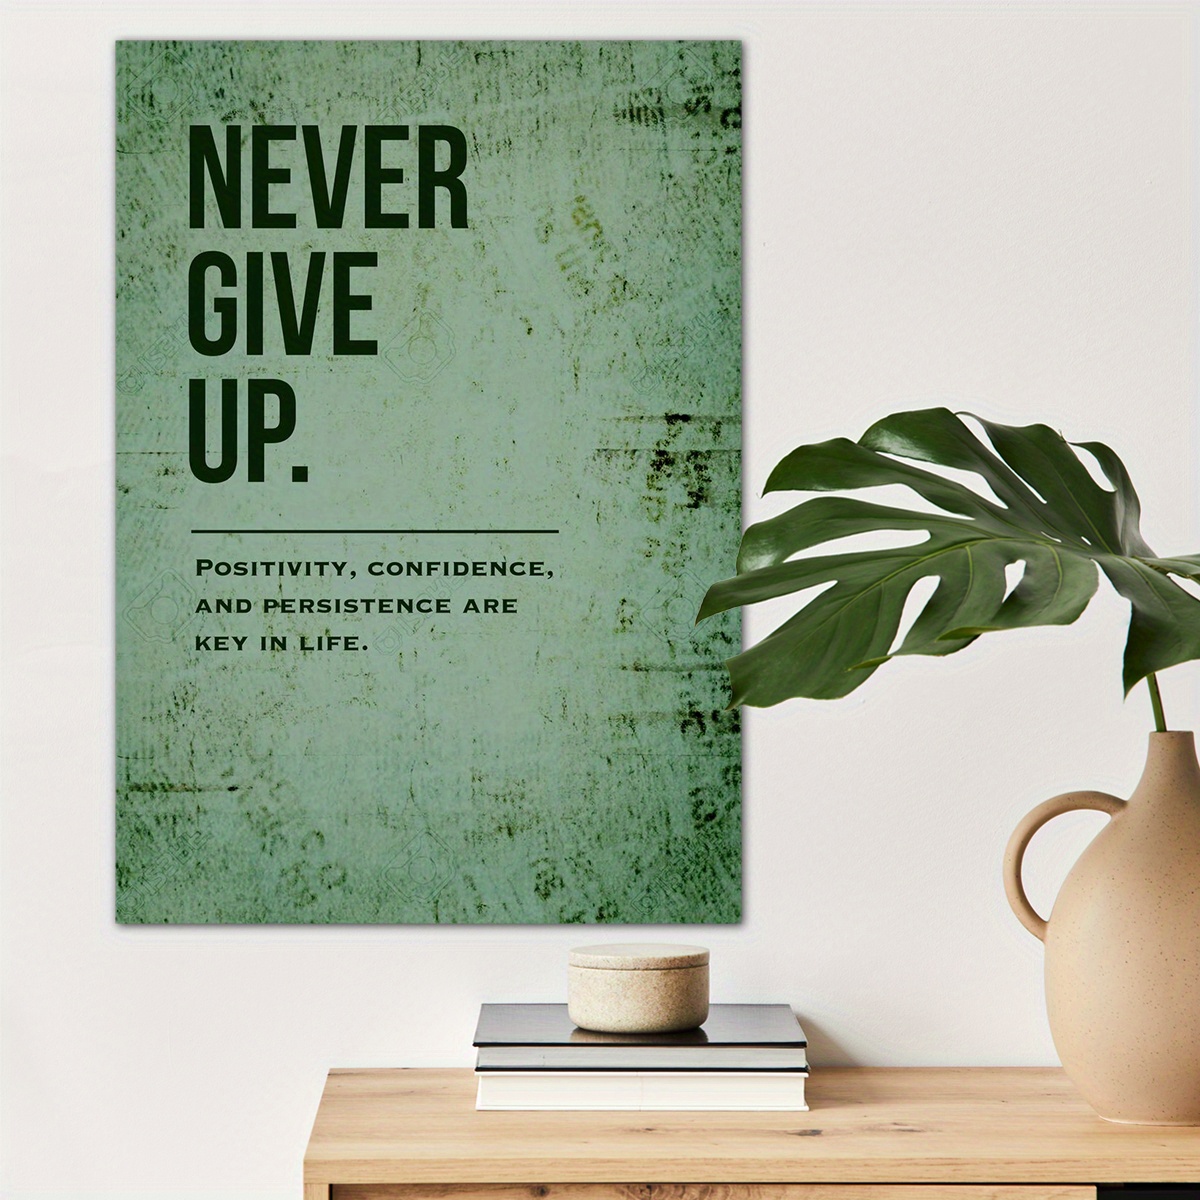 

1pc Never Give Up Quote Canvas Wall Art For Home Decor, Motivation Poster Wall Decor High Quality Canvas Prints For Living Room Bedroom Kitchen Office Cafe Decor, Perfect Gift And Decoration